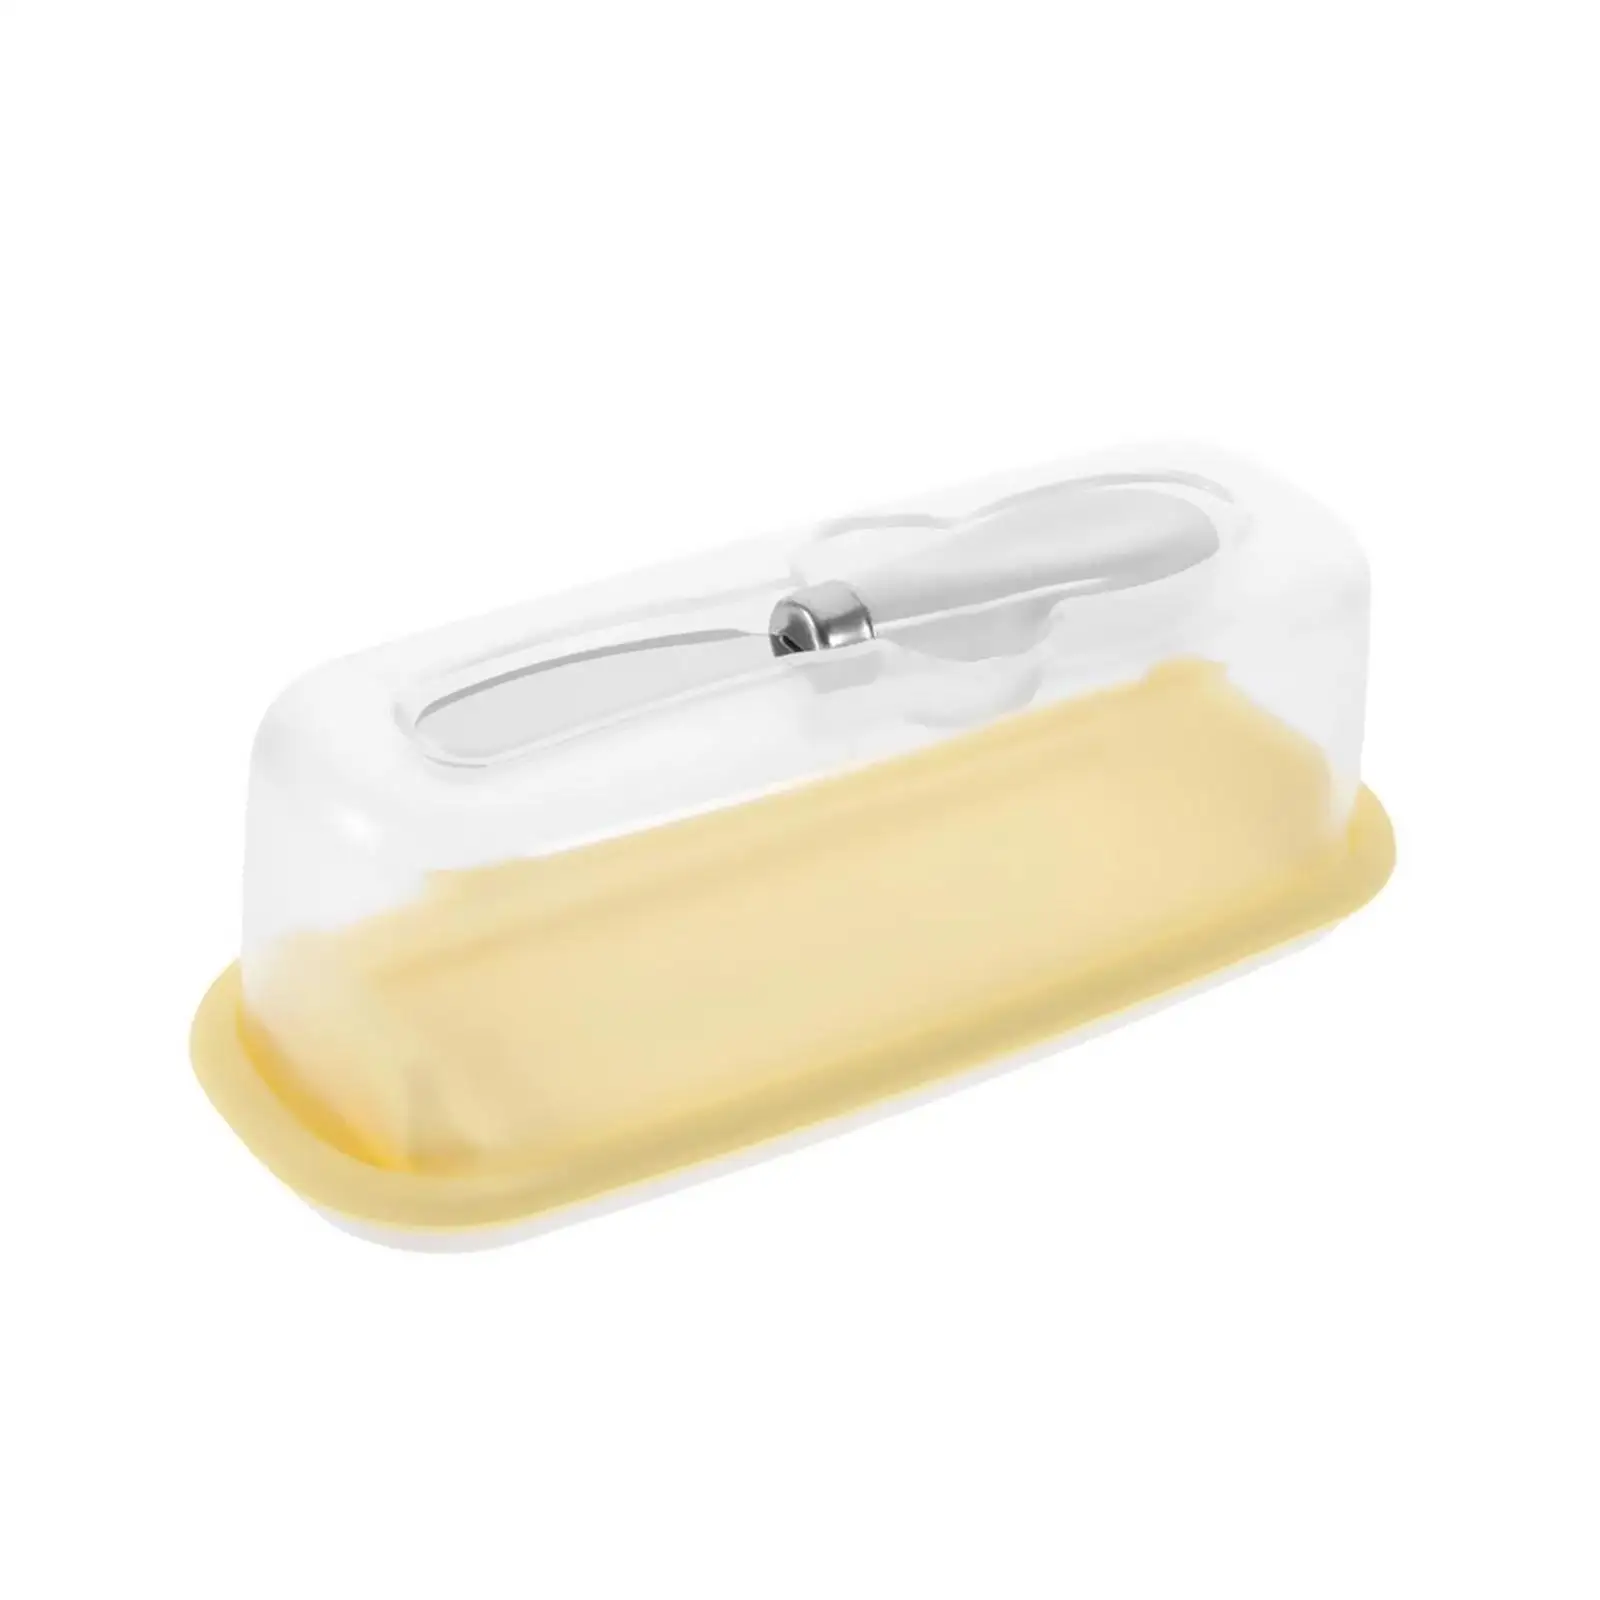 Butter Dish with Lid and Knife Easy Clean Dessert Trays Ramps Cheese Slicing Holder for Cupboard Restaurant Refrigerator